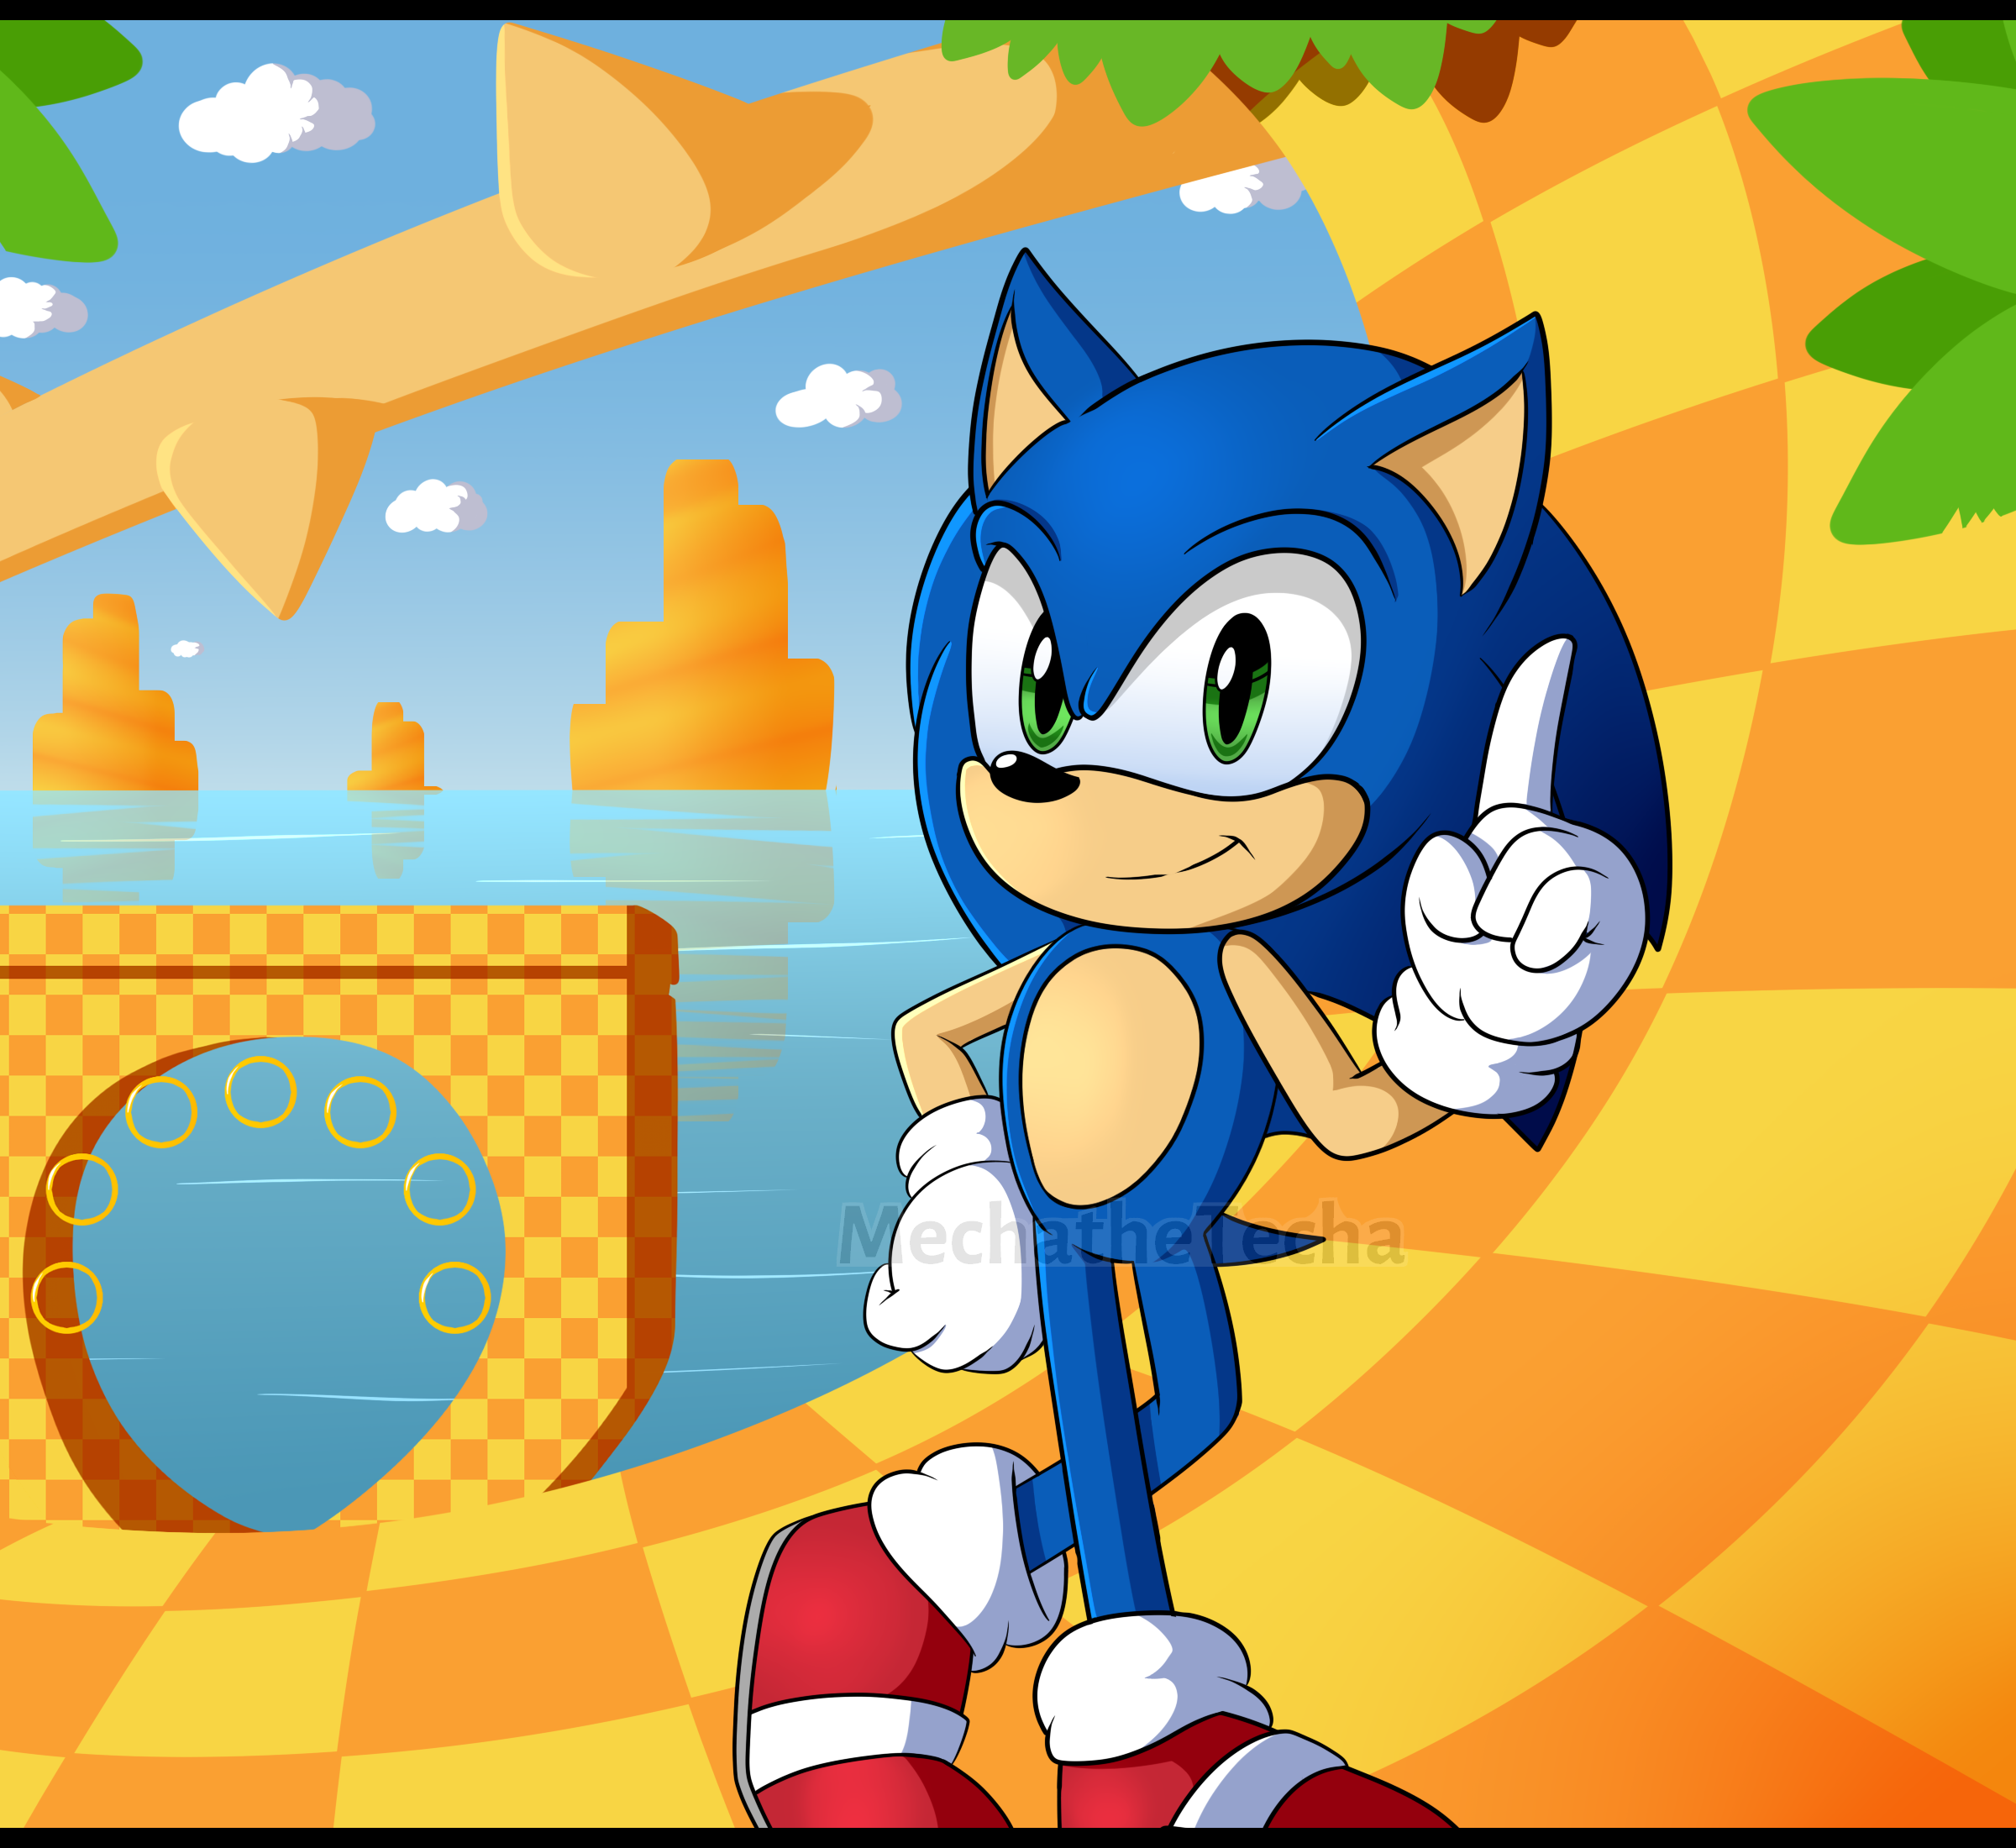 Sonic Classic Heroes title screen by SonicDash57 on DeviantArt